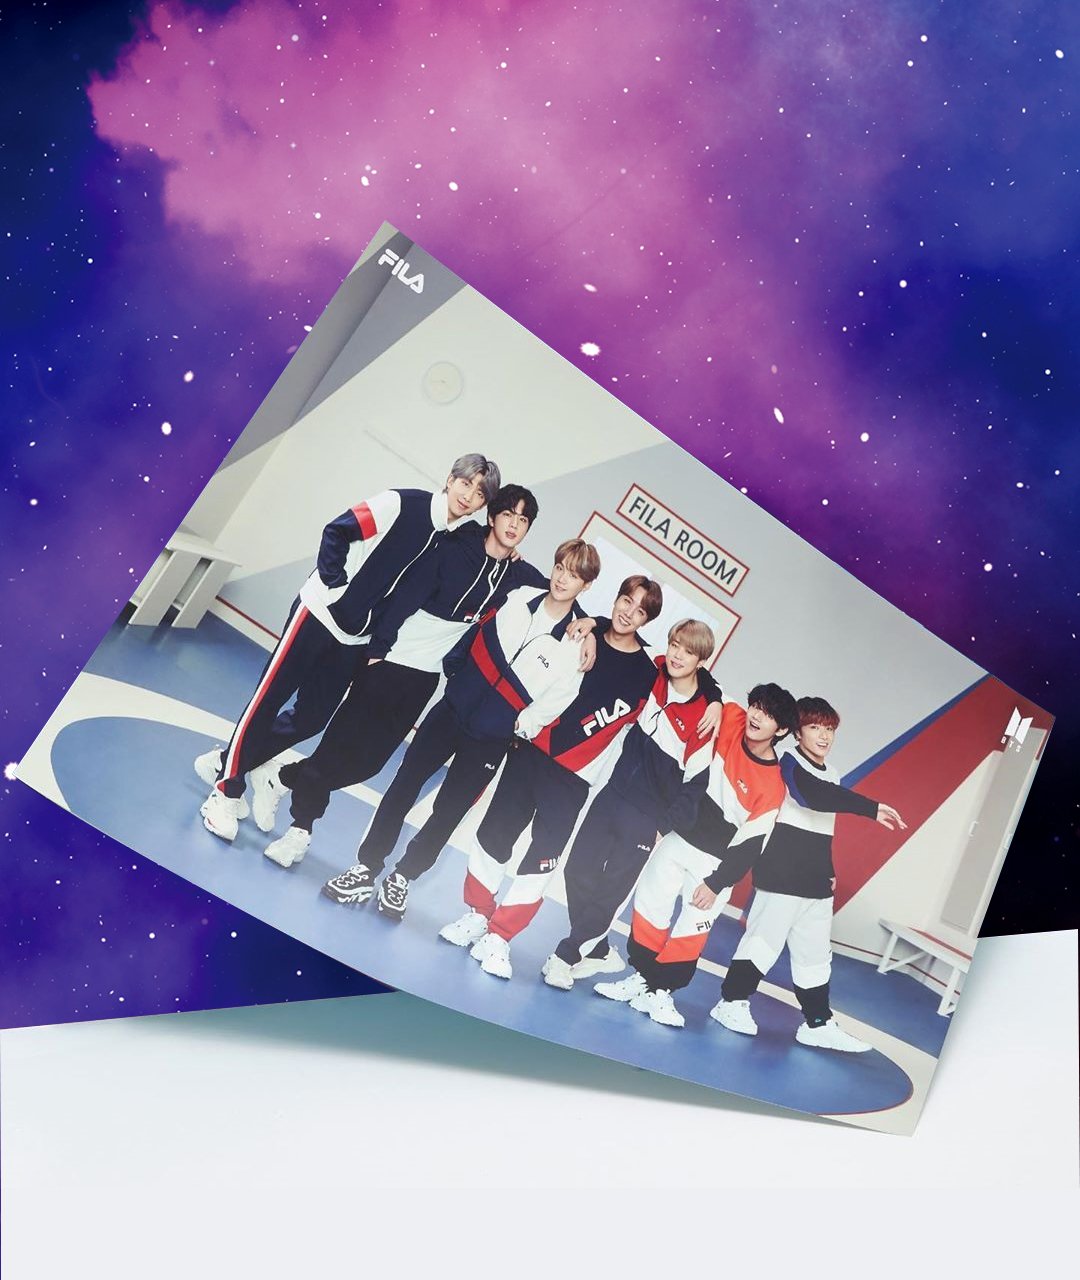 Tredje Rejsende rynker FILA Indonesia on Twitter: "FILA Voyager Collection Andromeda now available  at Official Online Store , WA Shop From Home and Offline Store Free FILA  Collectible Poster Vol 2 for purchasing FILA Voyager